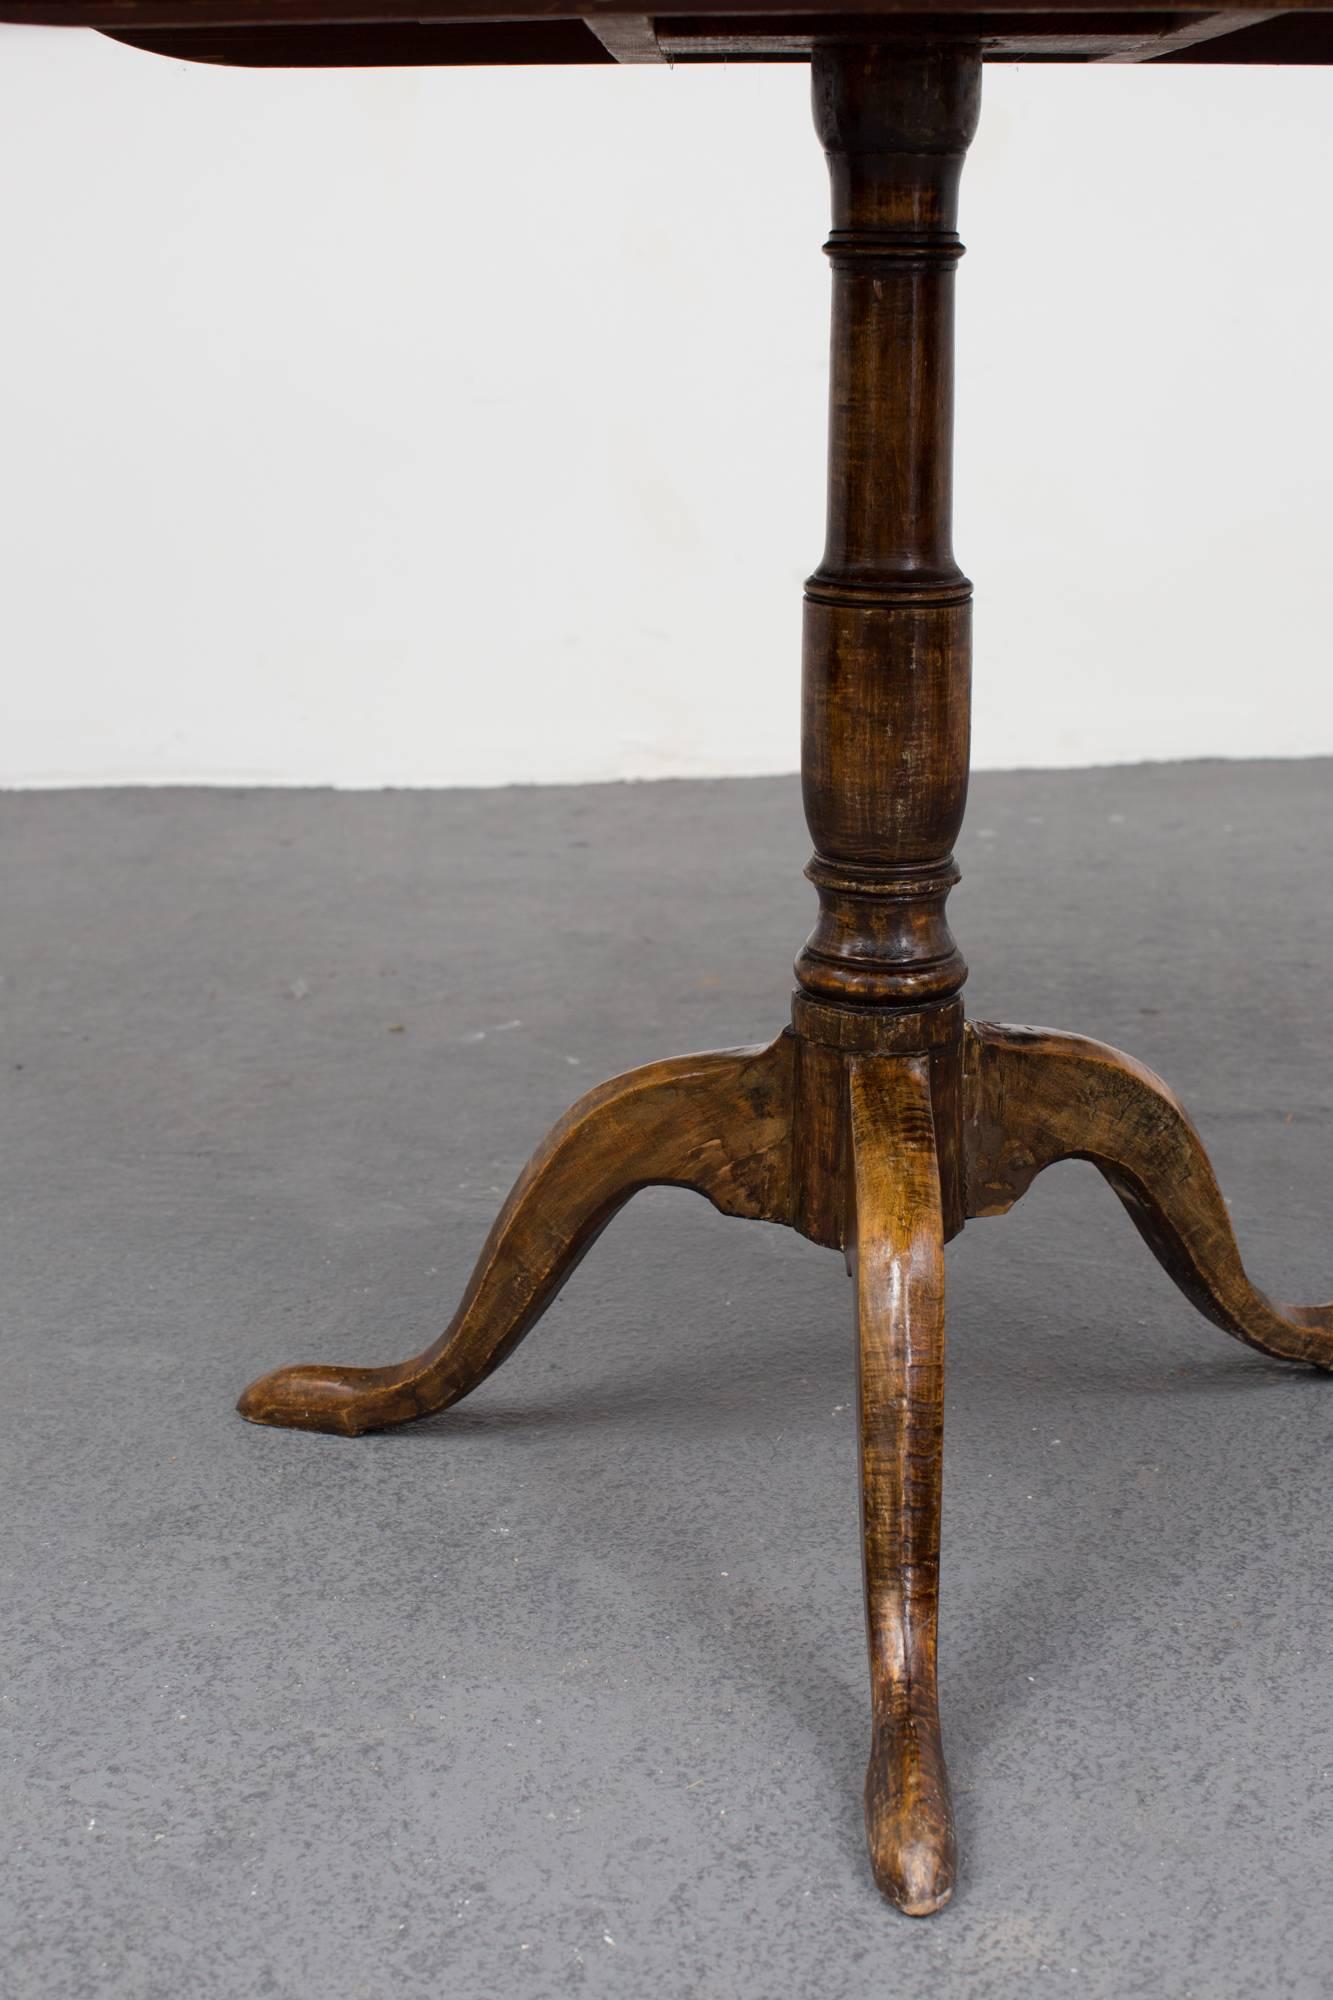 Late 18th Century Tilt-Top Table Side Table Swedish Alder Root, 18th Century, Sweden